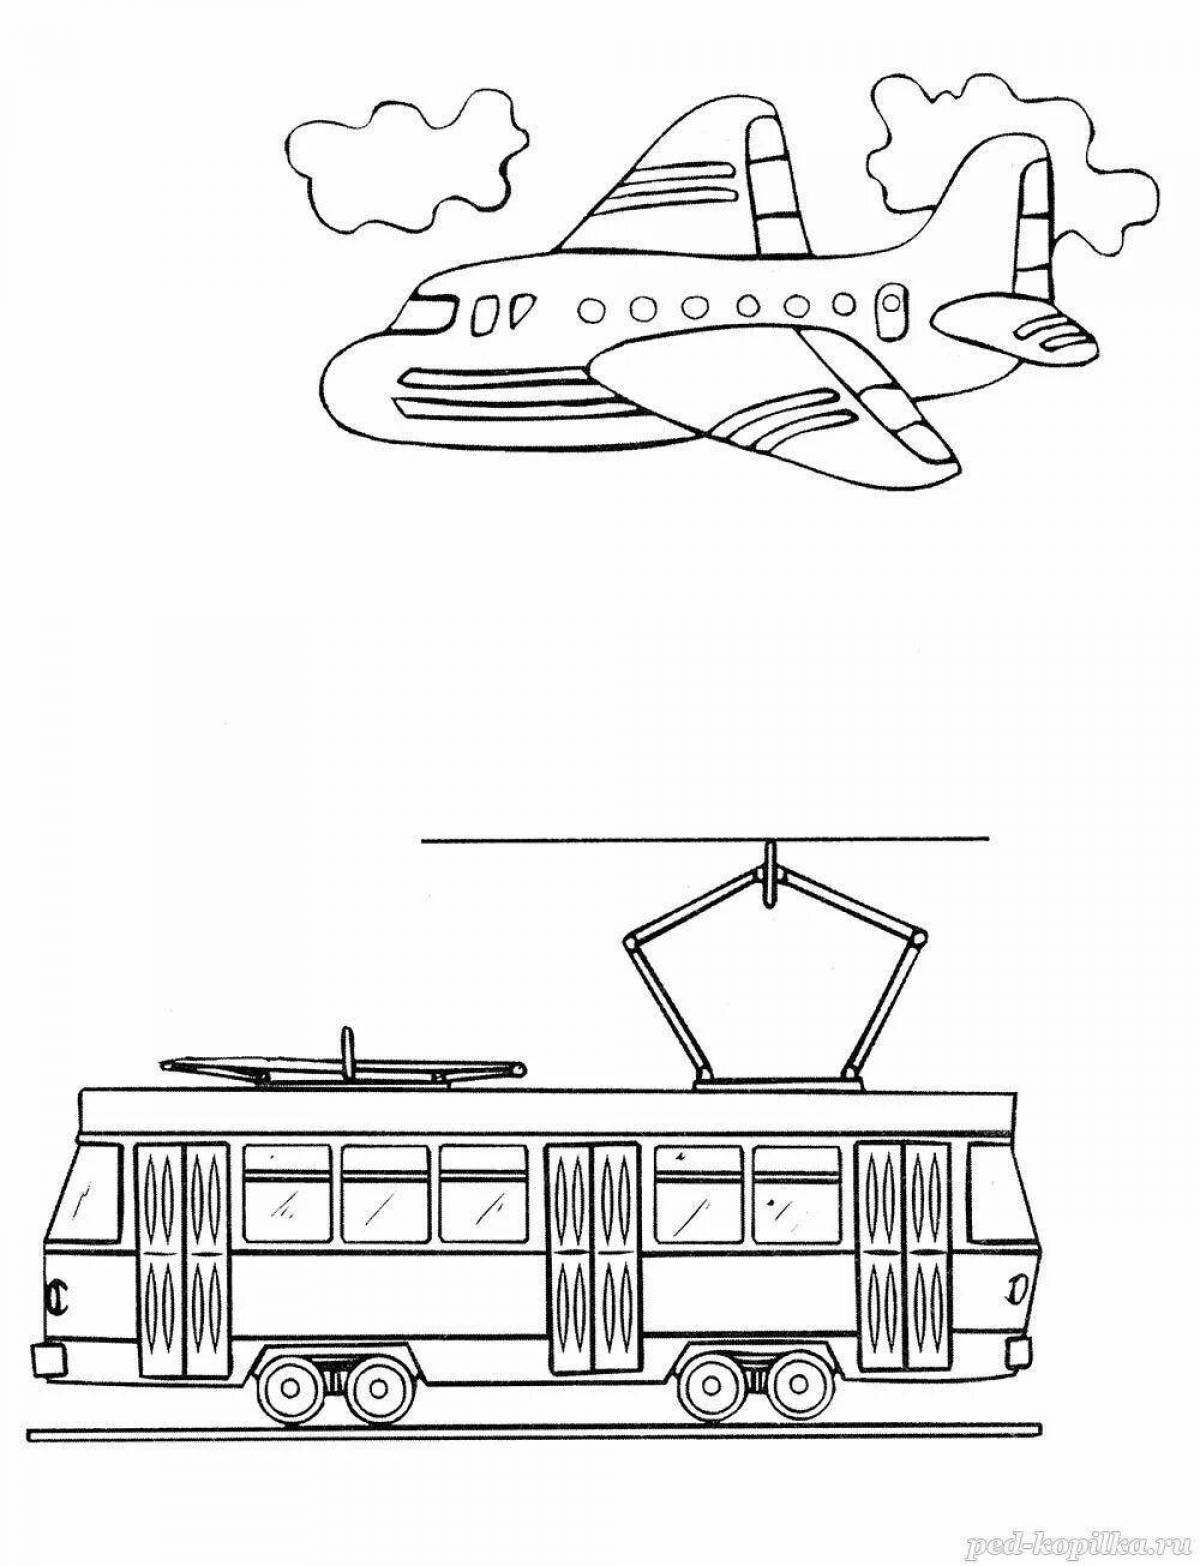 Adorable tram coloring book for kids